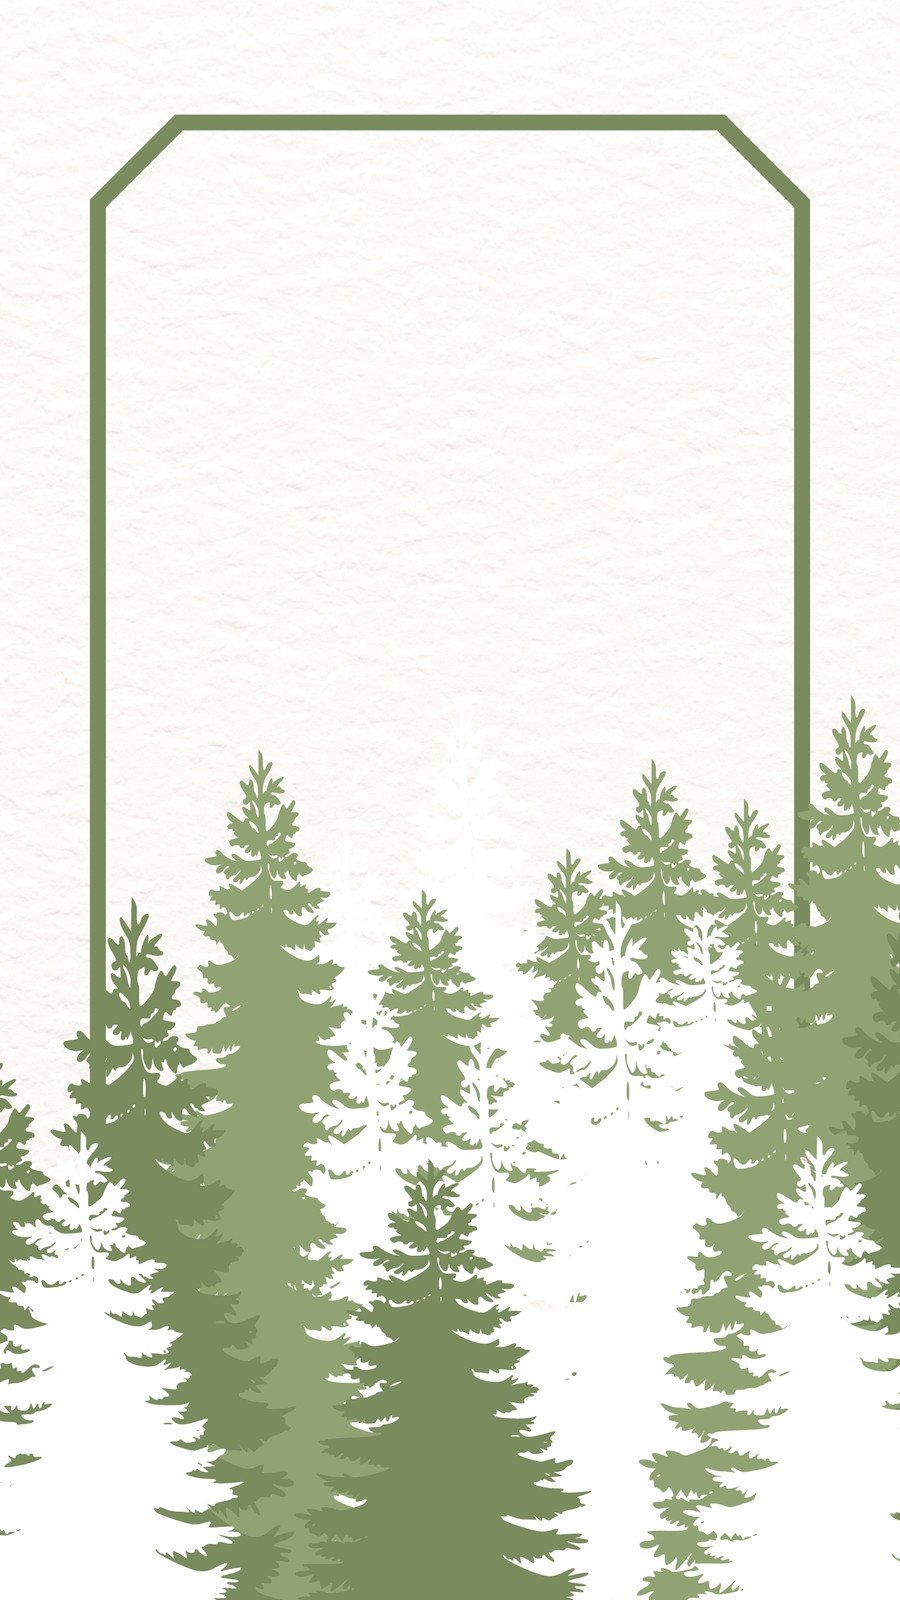 green forest with pine trees  Tree wallpaper iphone, Forest wallpaper  iphone, Tree iphone